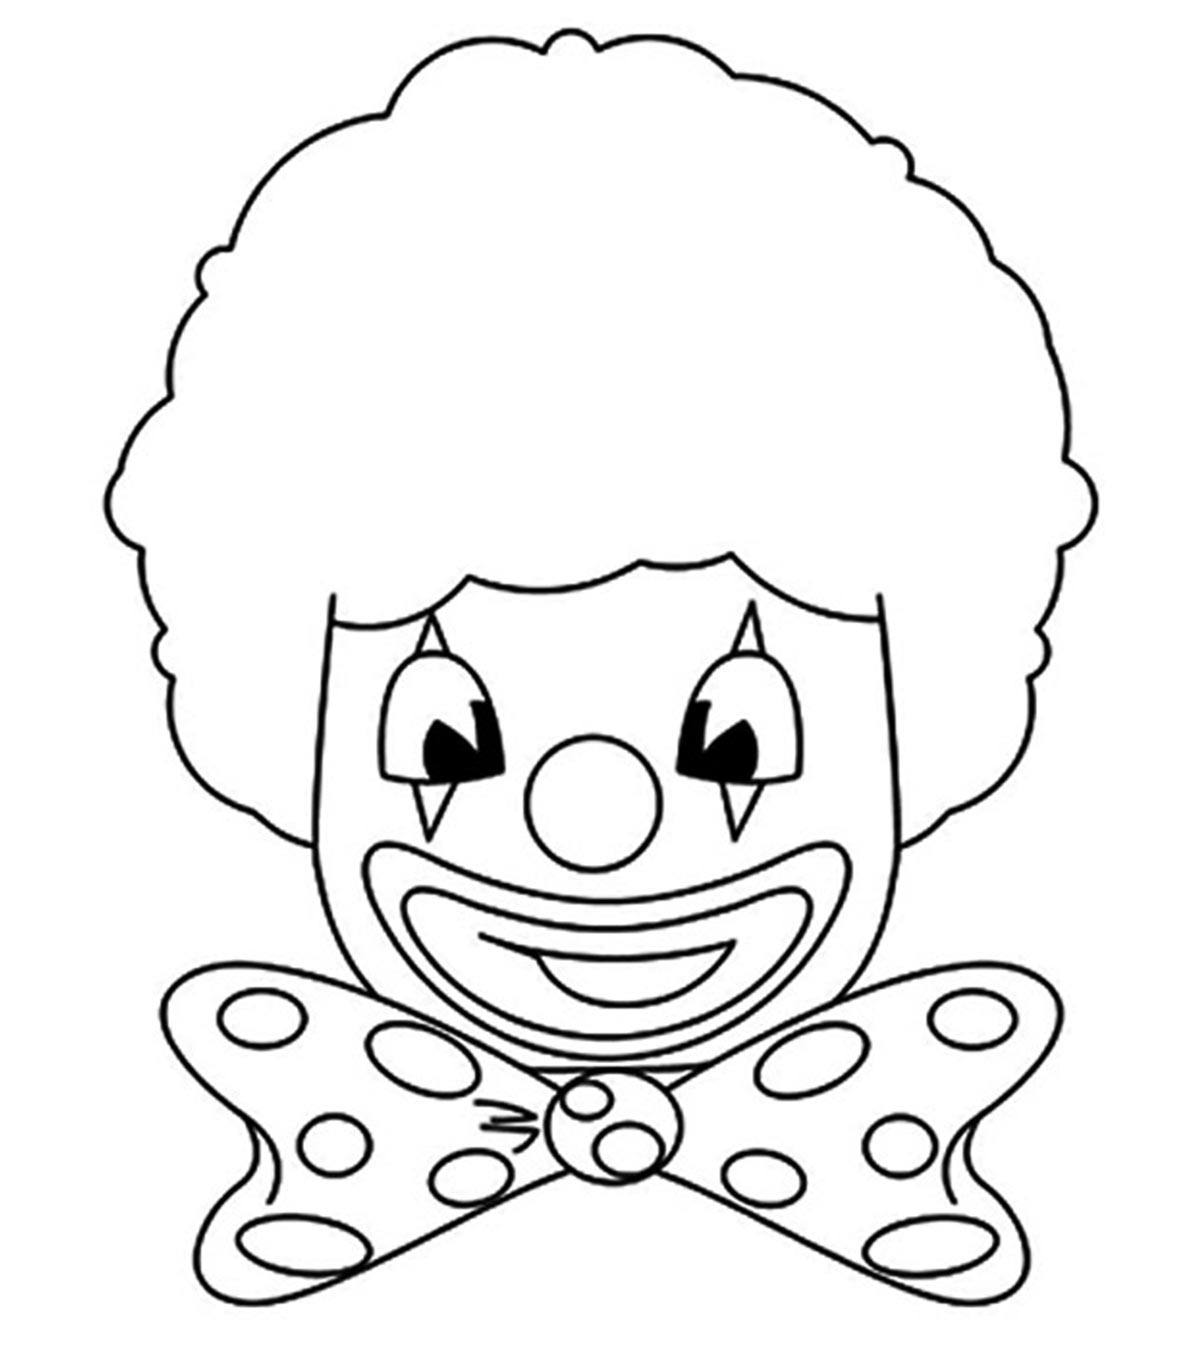 10 Funny Clown Coloring Pages For Your Little Ones